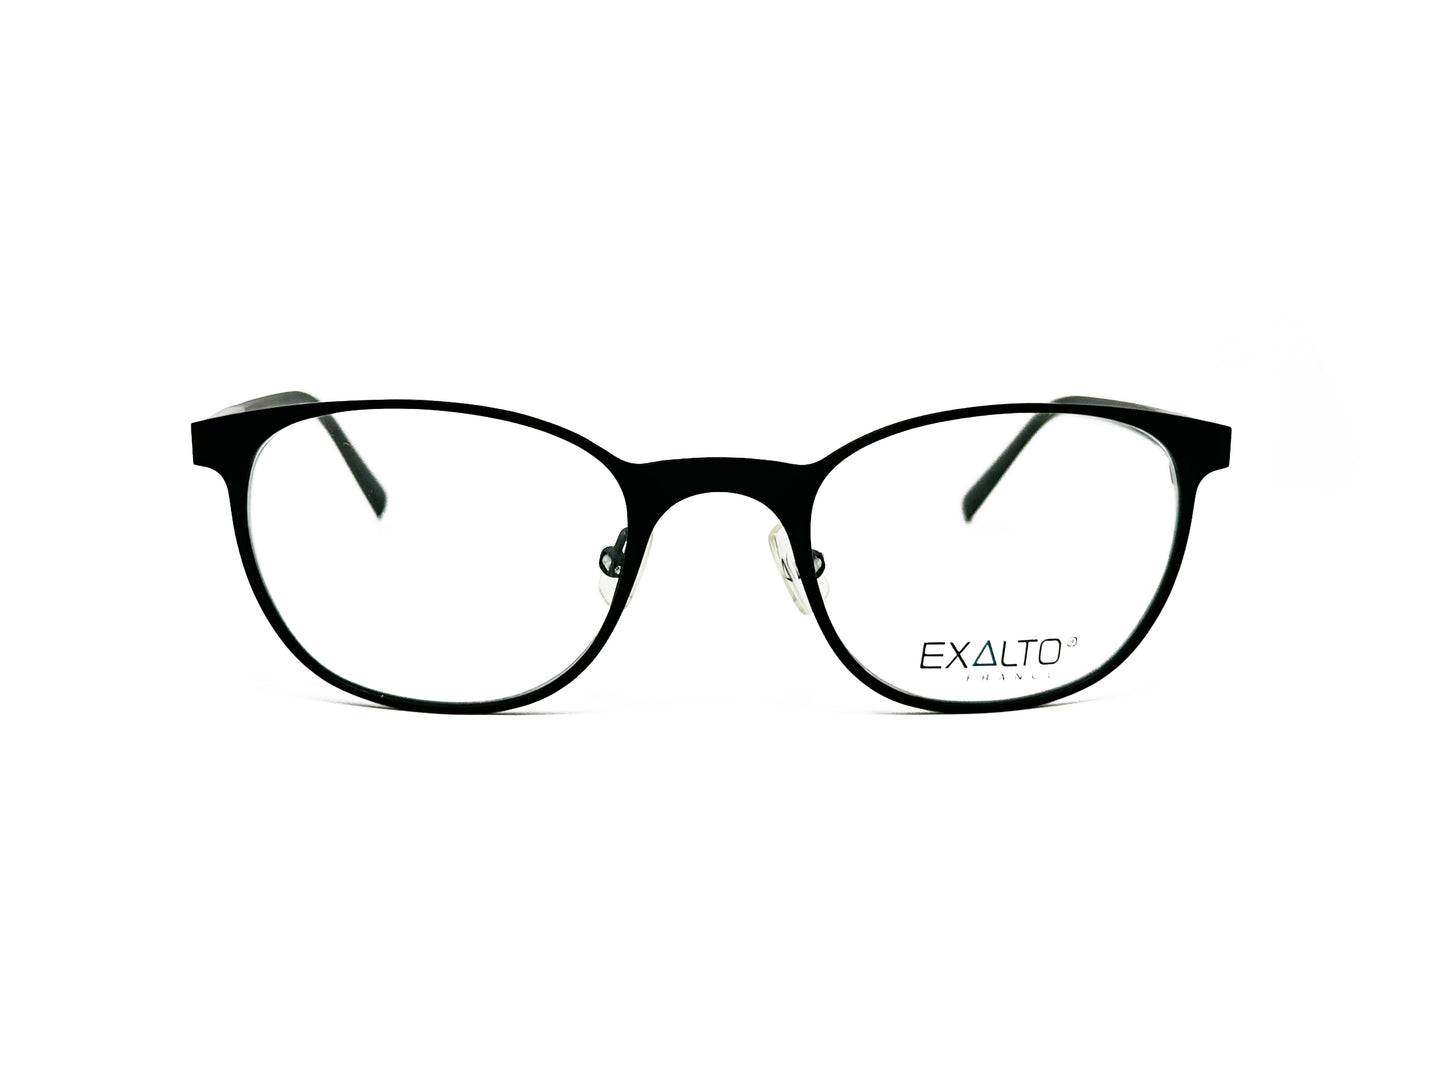 Exalto rounded-square, metal, optical frame. Model: 65N061. Color: Black/Titanium with red stripe. Front view. 